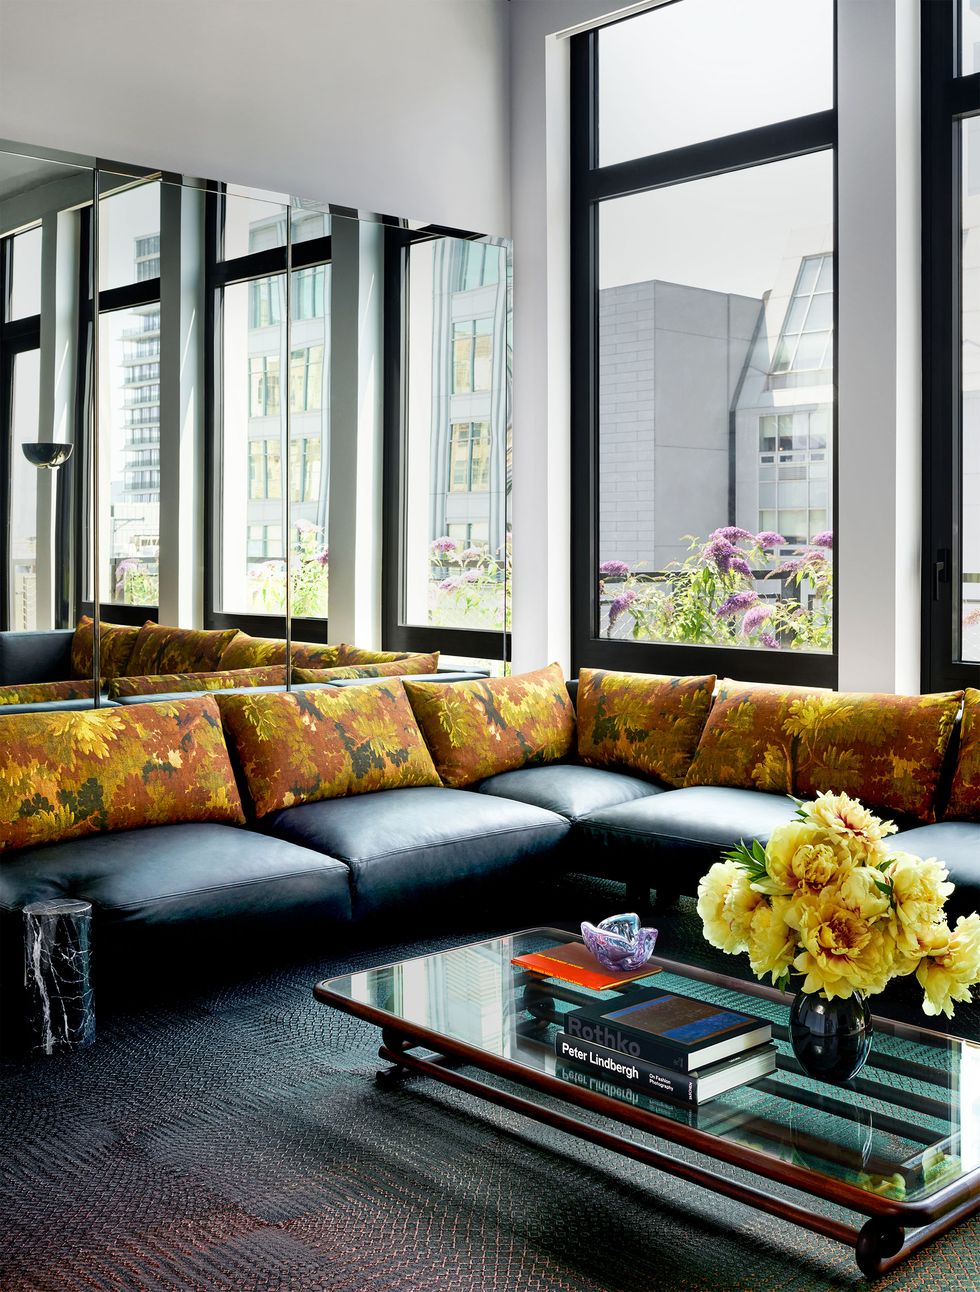 a living room framed by mirrors and windows has a sectional with black leather seat cushions and flowered fabric back cushions, a low glass cocktail framed in curved wood, and a dark patterned rug